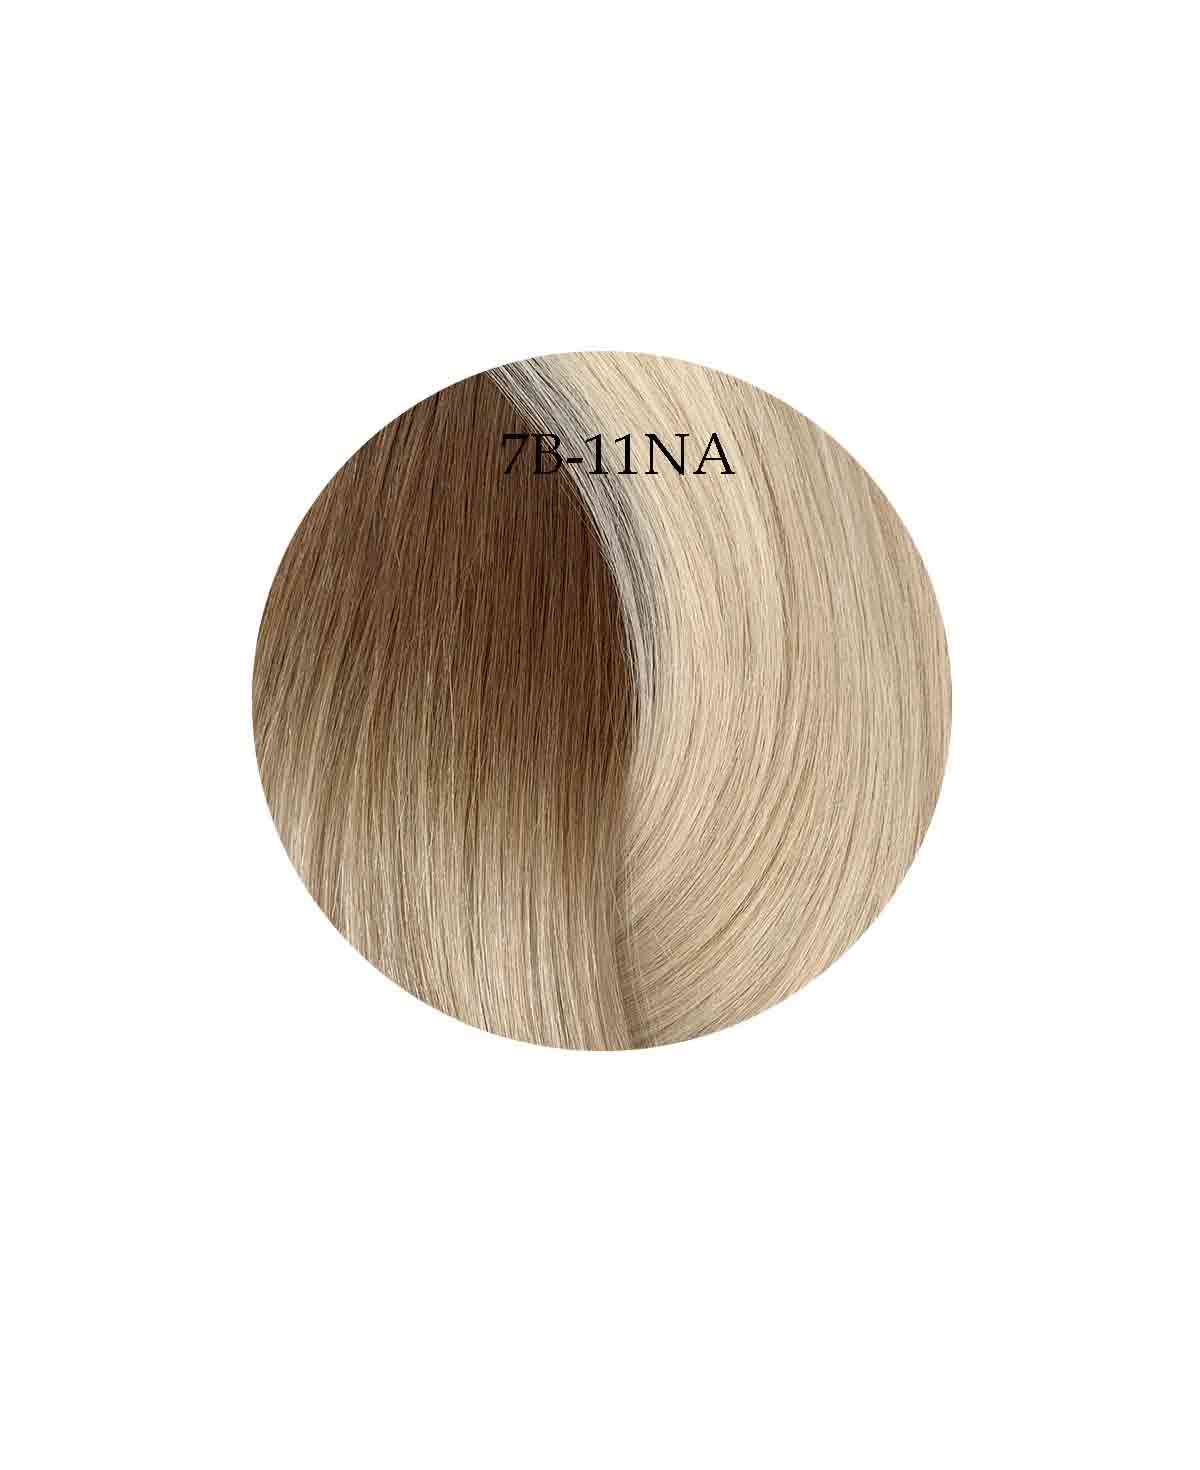 30-35cm (14") SKIN WEFT HAIR-EXTENSIONS - OMBRE WARM SALTED CARAMEL 7B-11NA